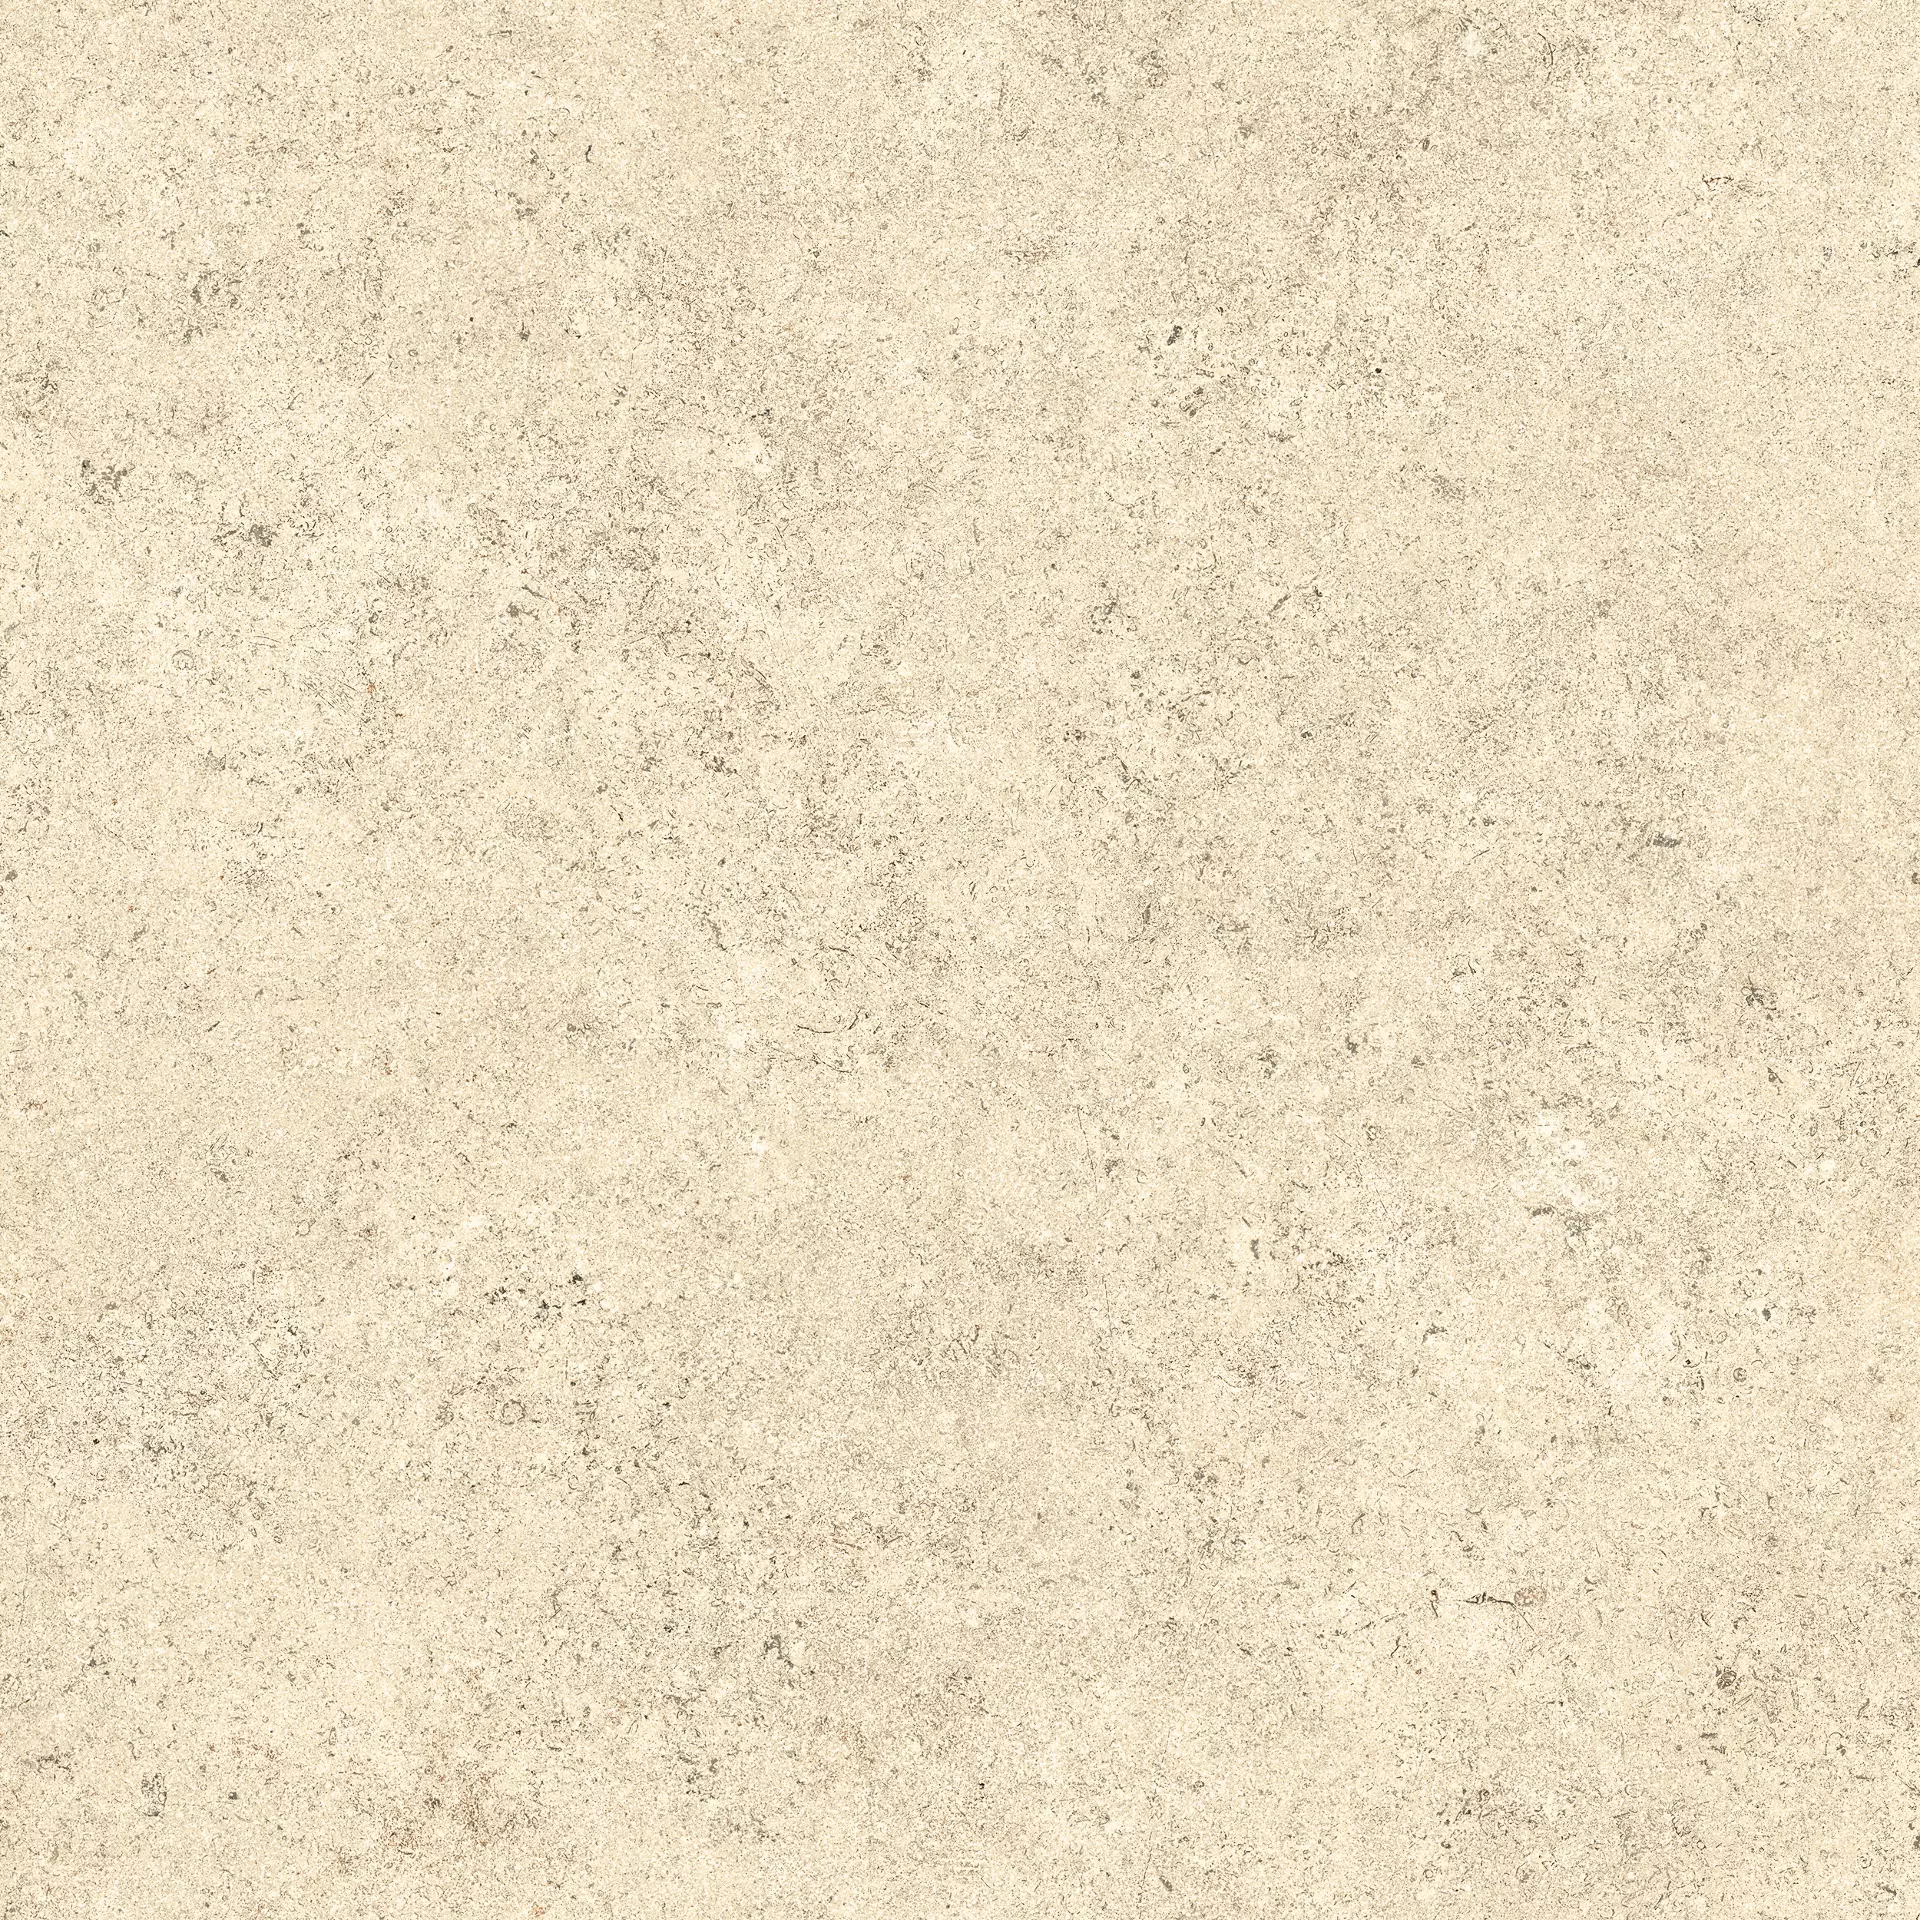 Cottodeste Pura Ivory Rolled Protect EGWPR15 60x60cm rectified 14mm